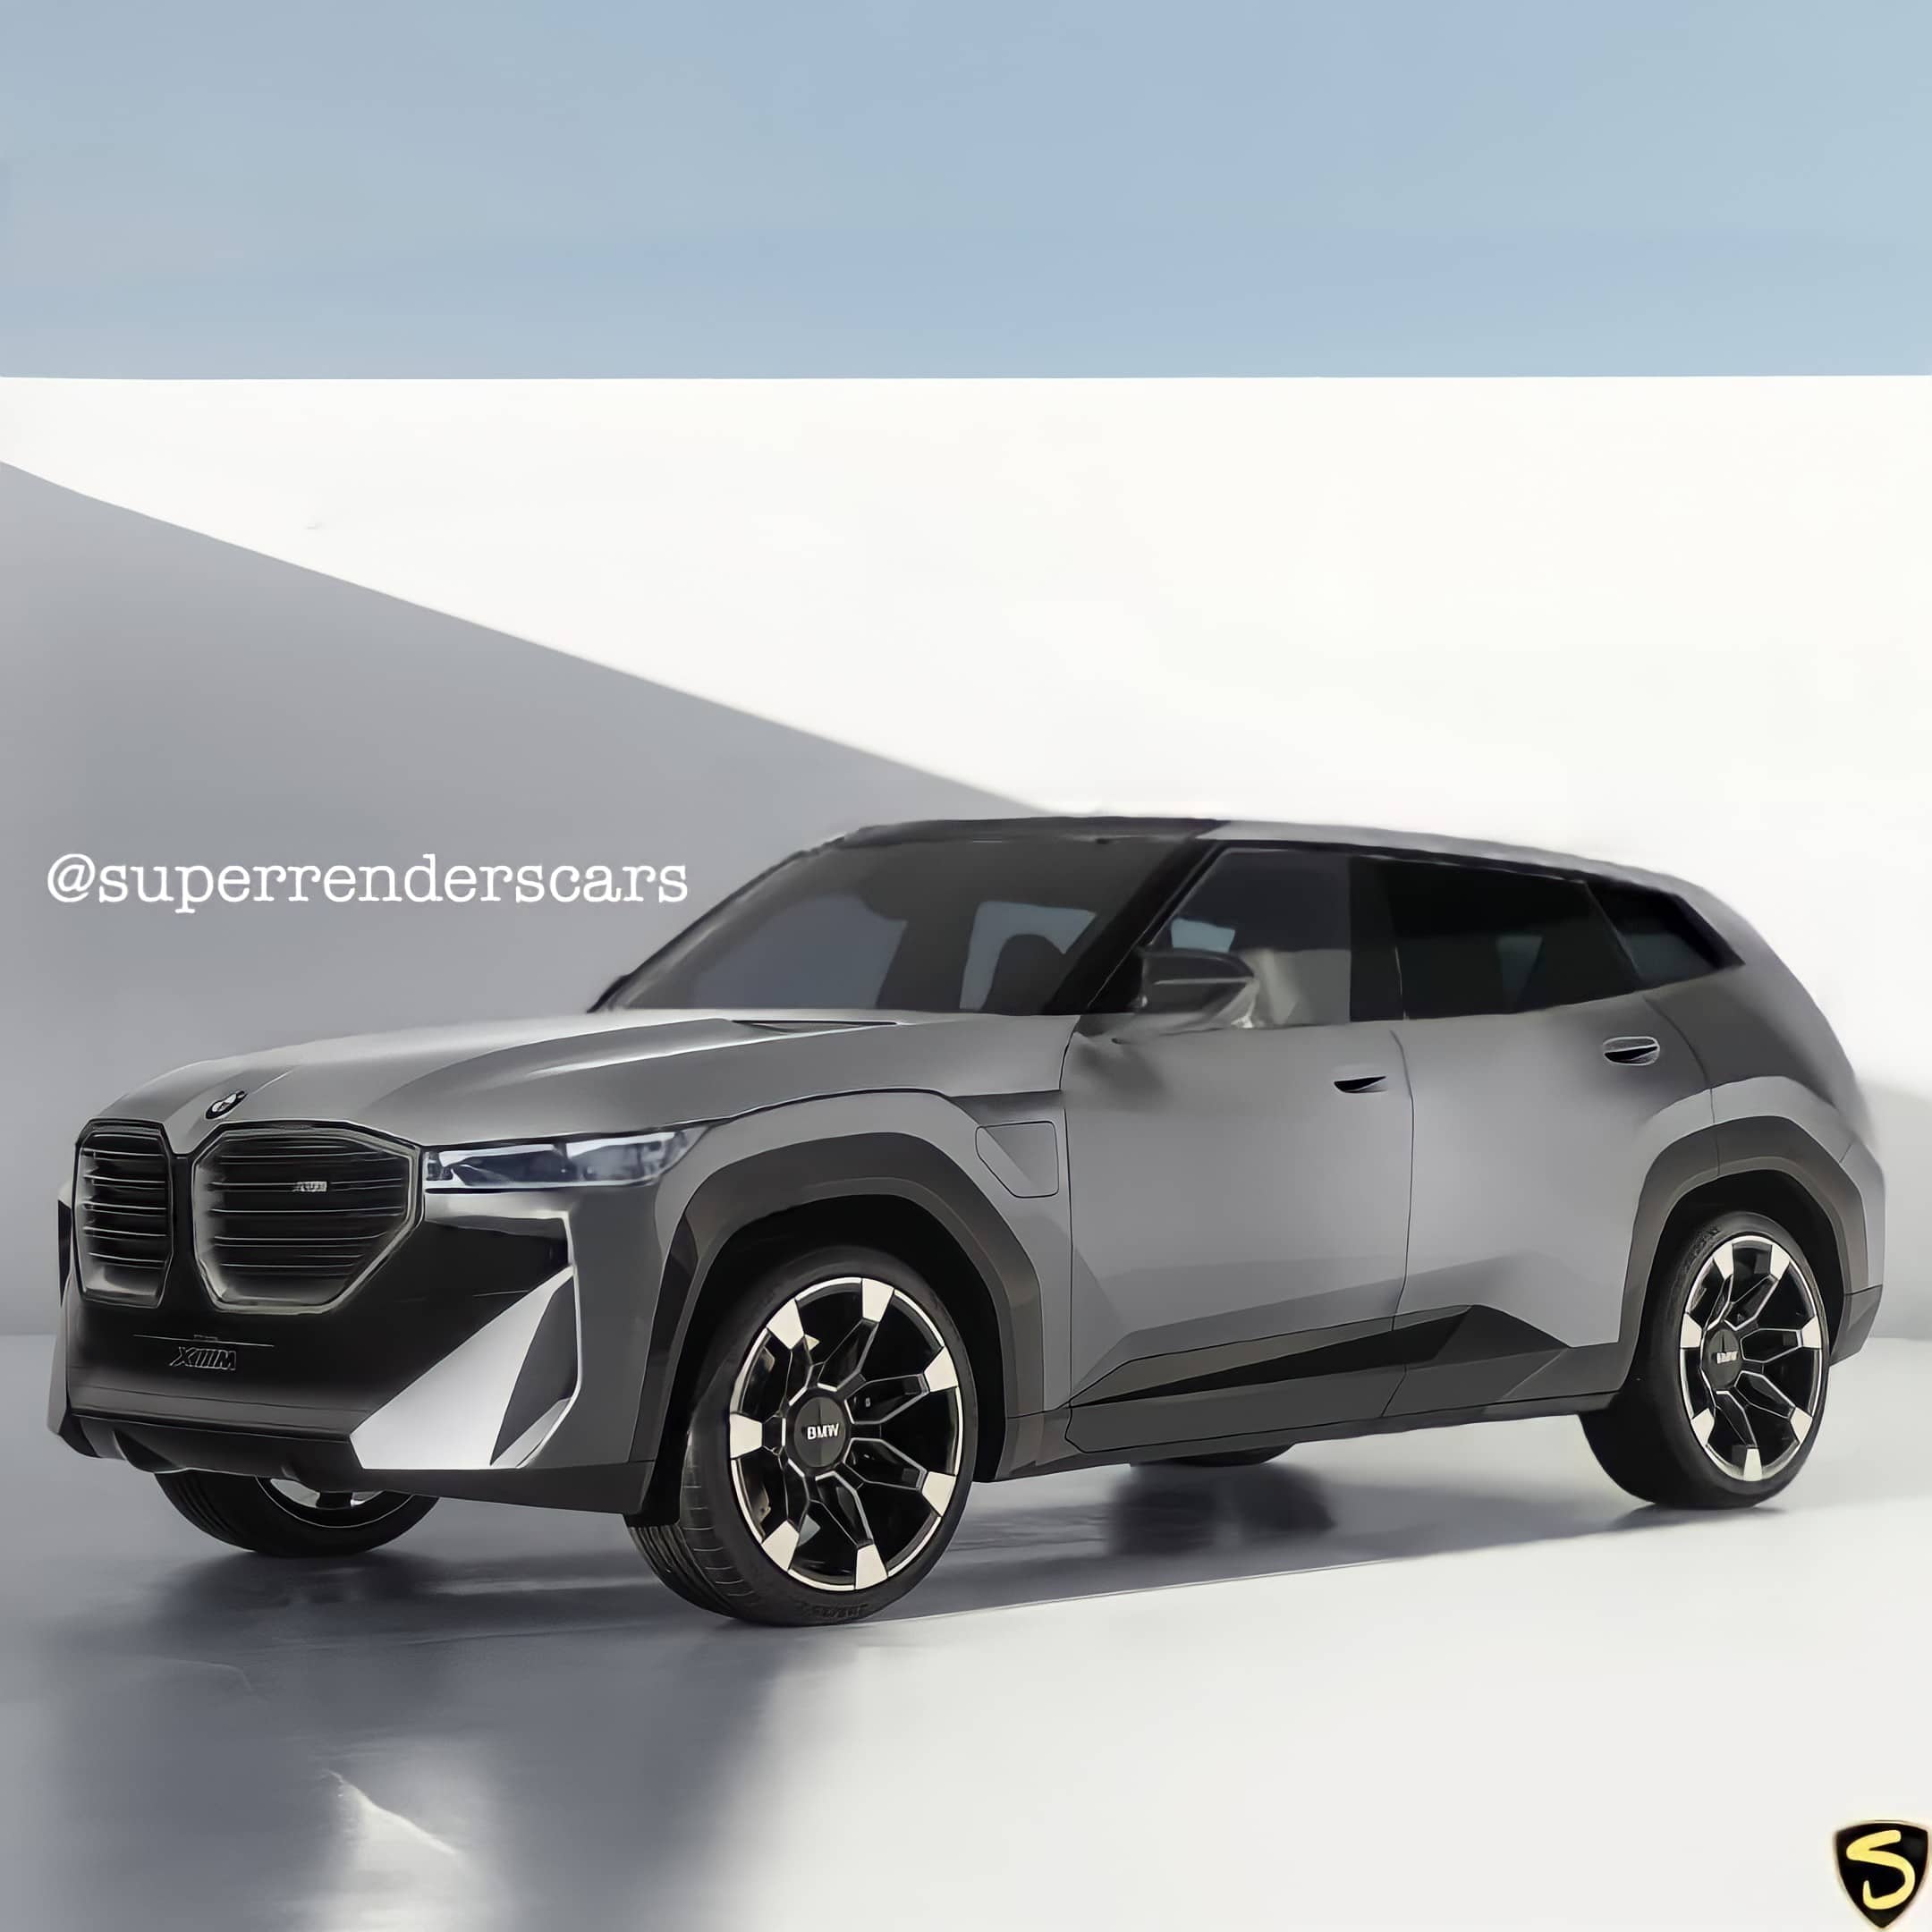 BMW XM Production-Ready Model Rendered with More Normal Looks